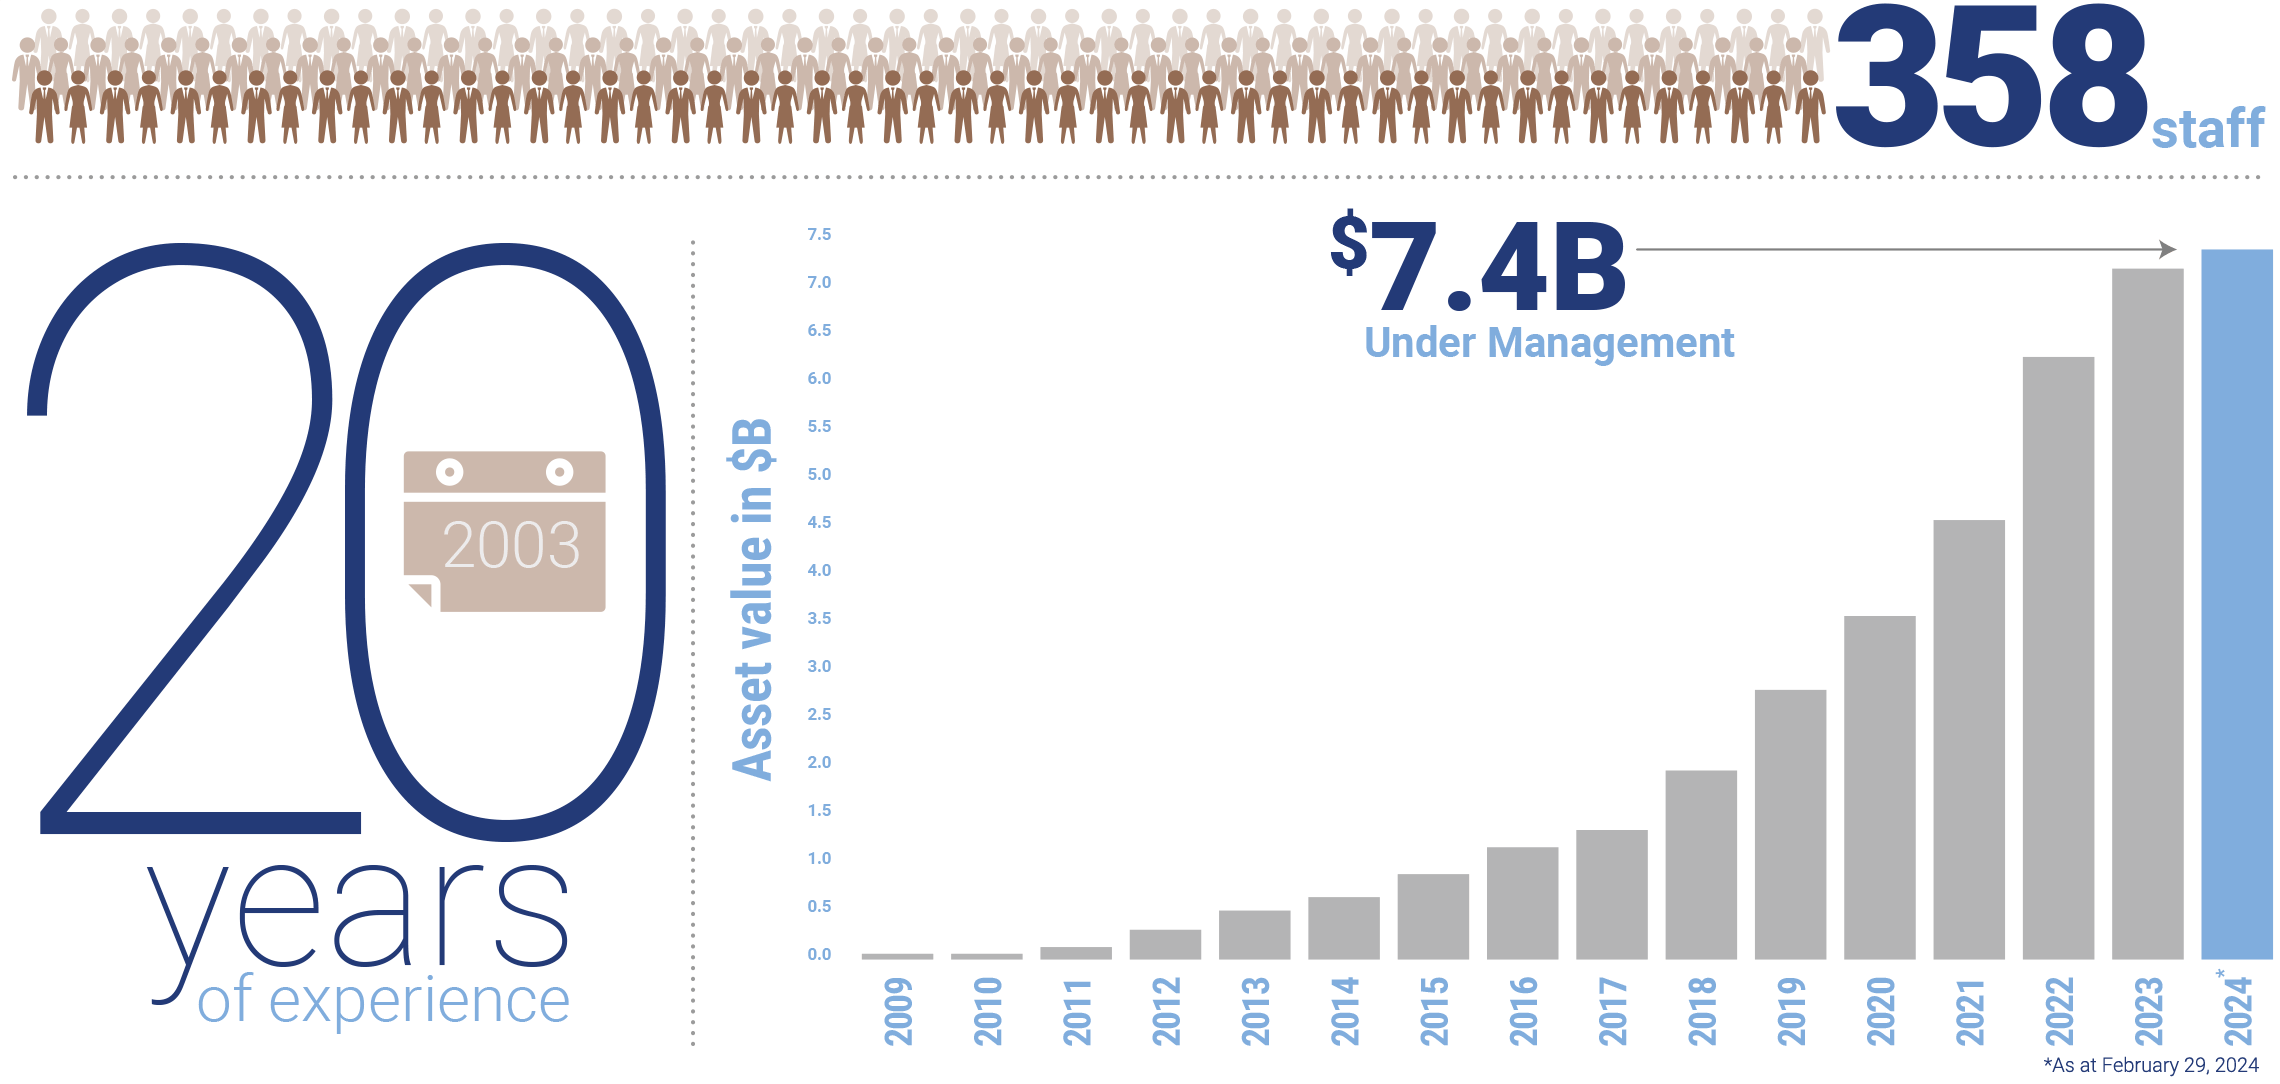 19 years of experience, 320 staff, over $6 billion under management as of September 30, 2022